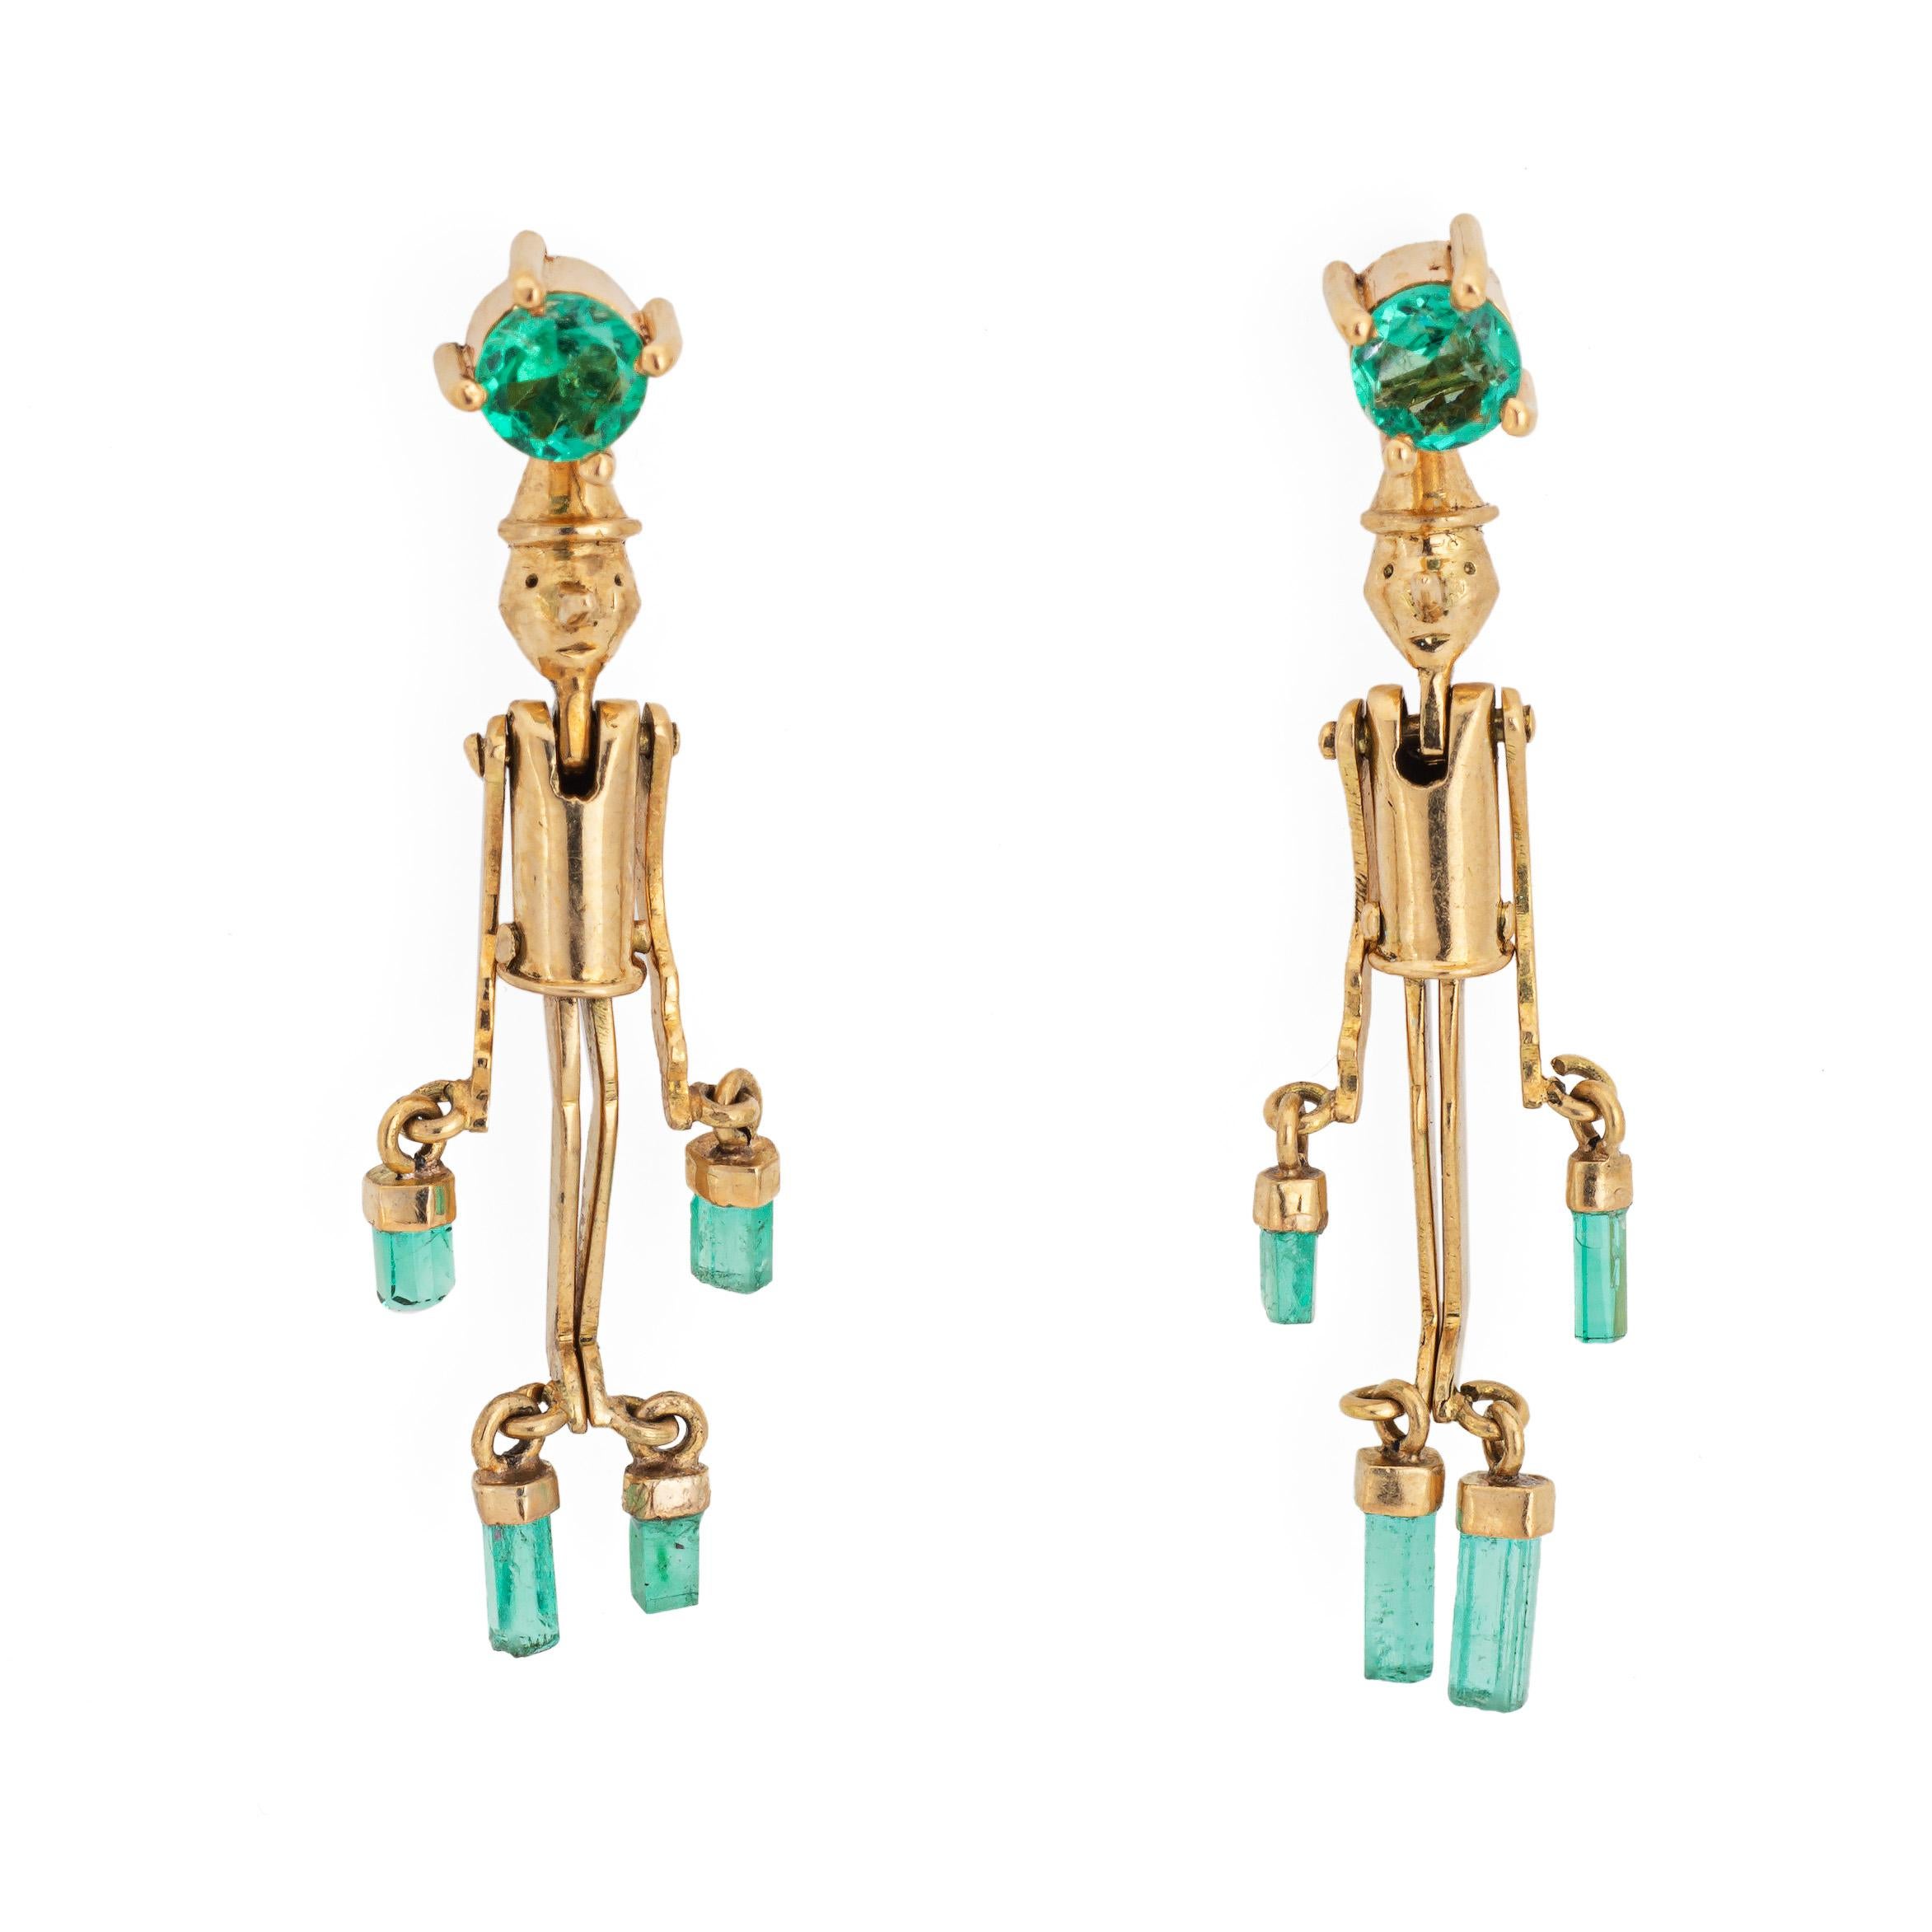 Round Cut Pinocchio Emerald Earrings Articulated 18k Yellow Gold 1.25